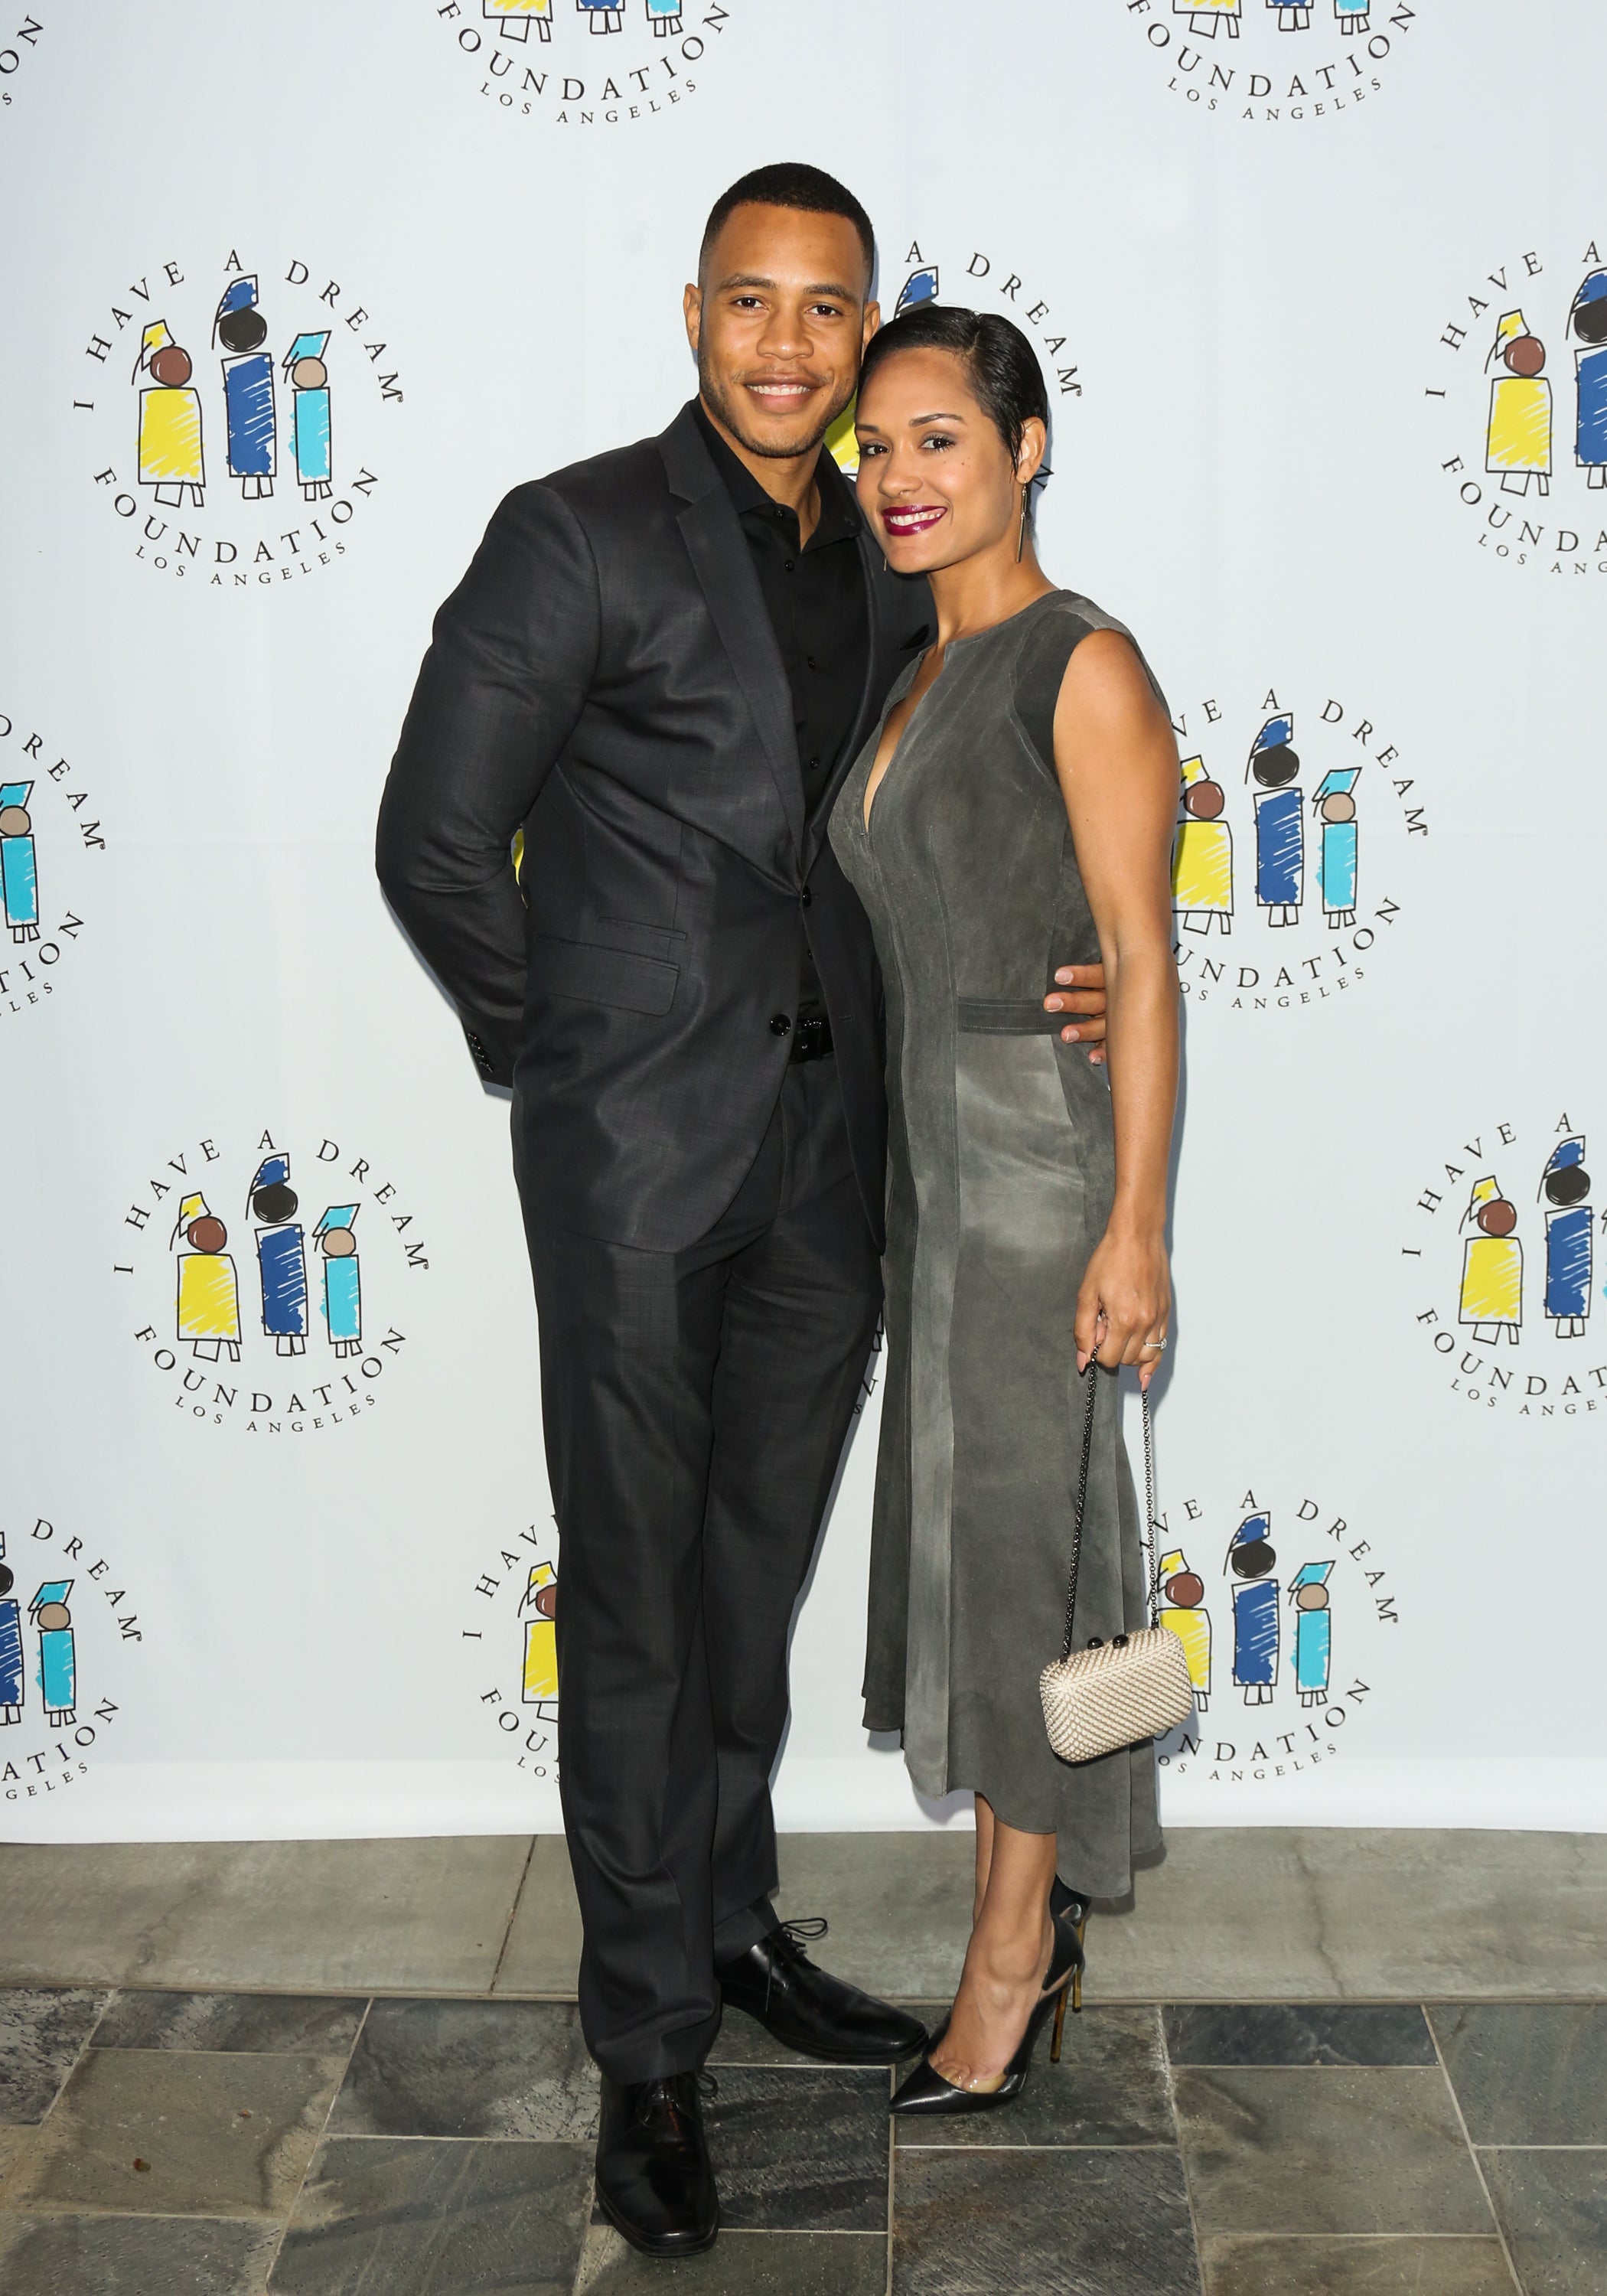 Surprise! 'Empire' Co-Stars Grace Gealey and Trai Byers Are Married
